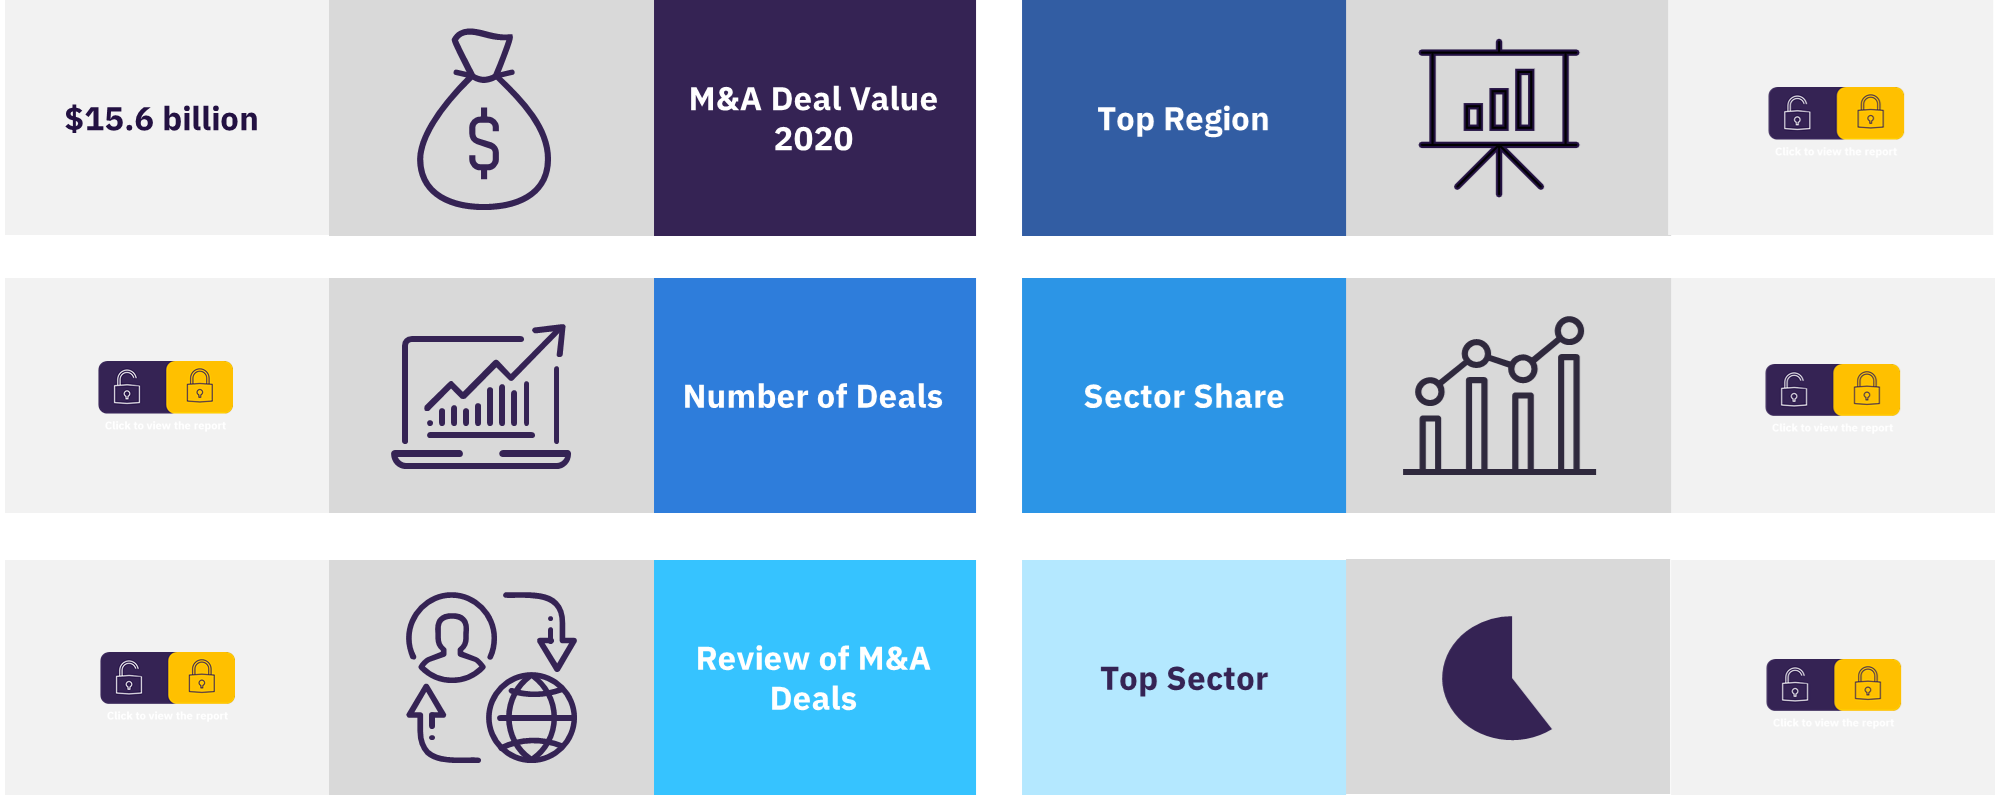 Overview of the global M&A deals in the packaging sector